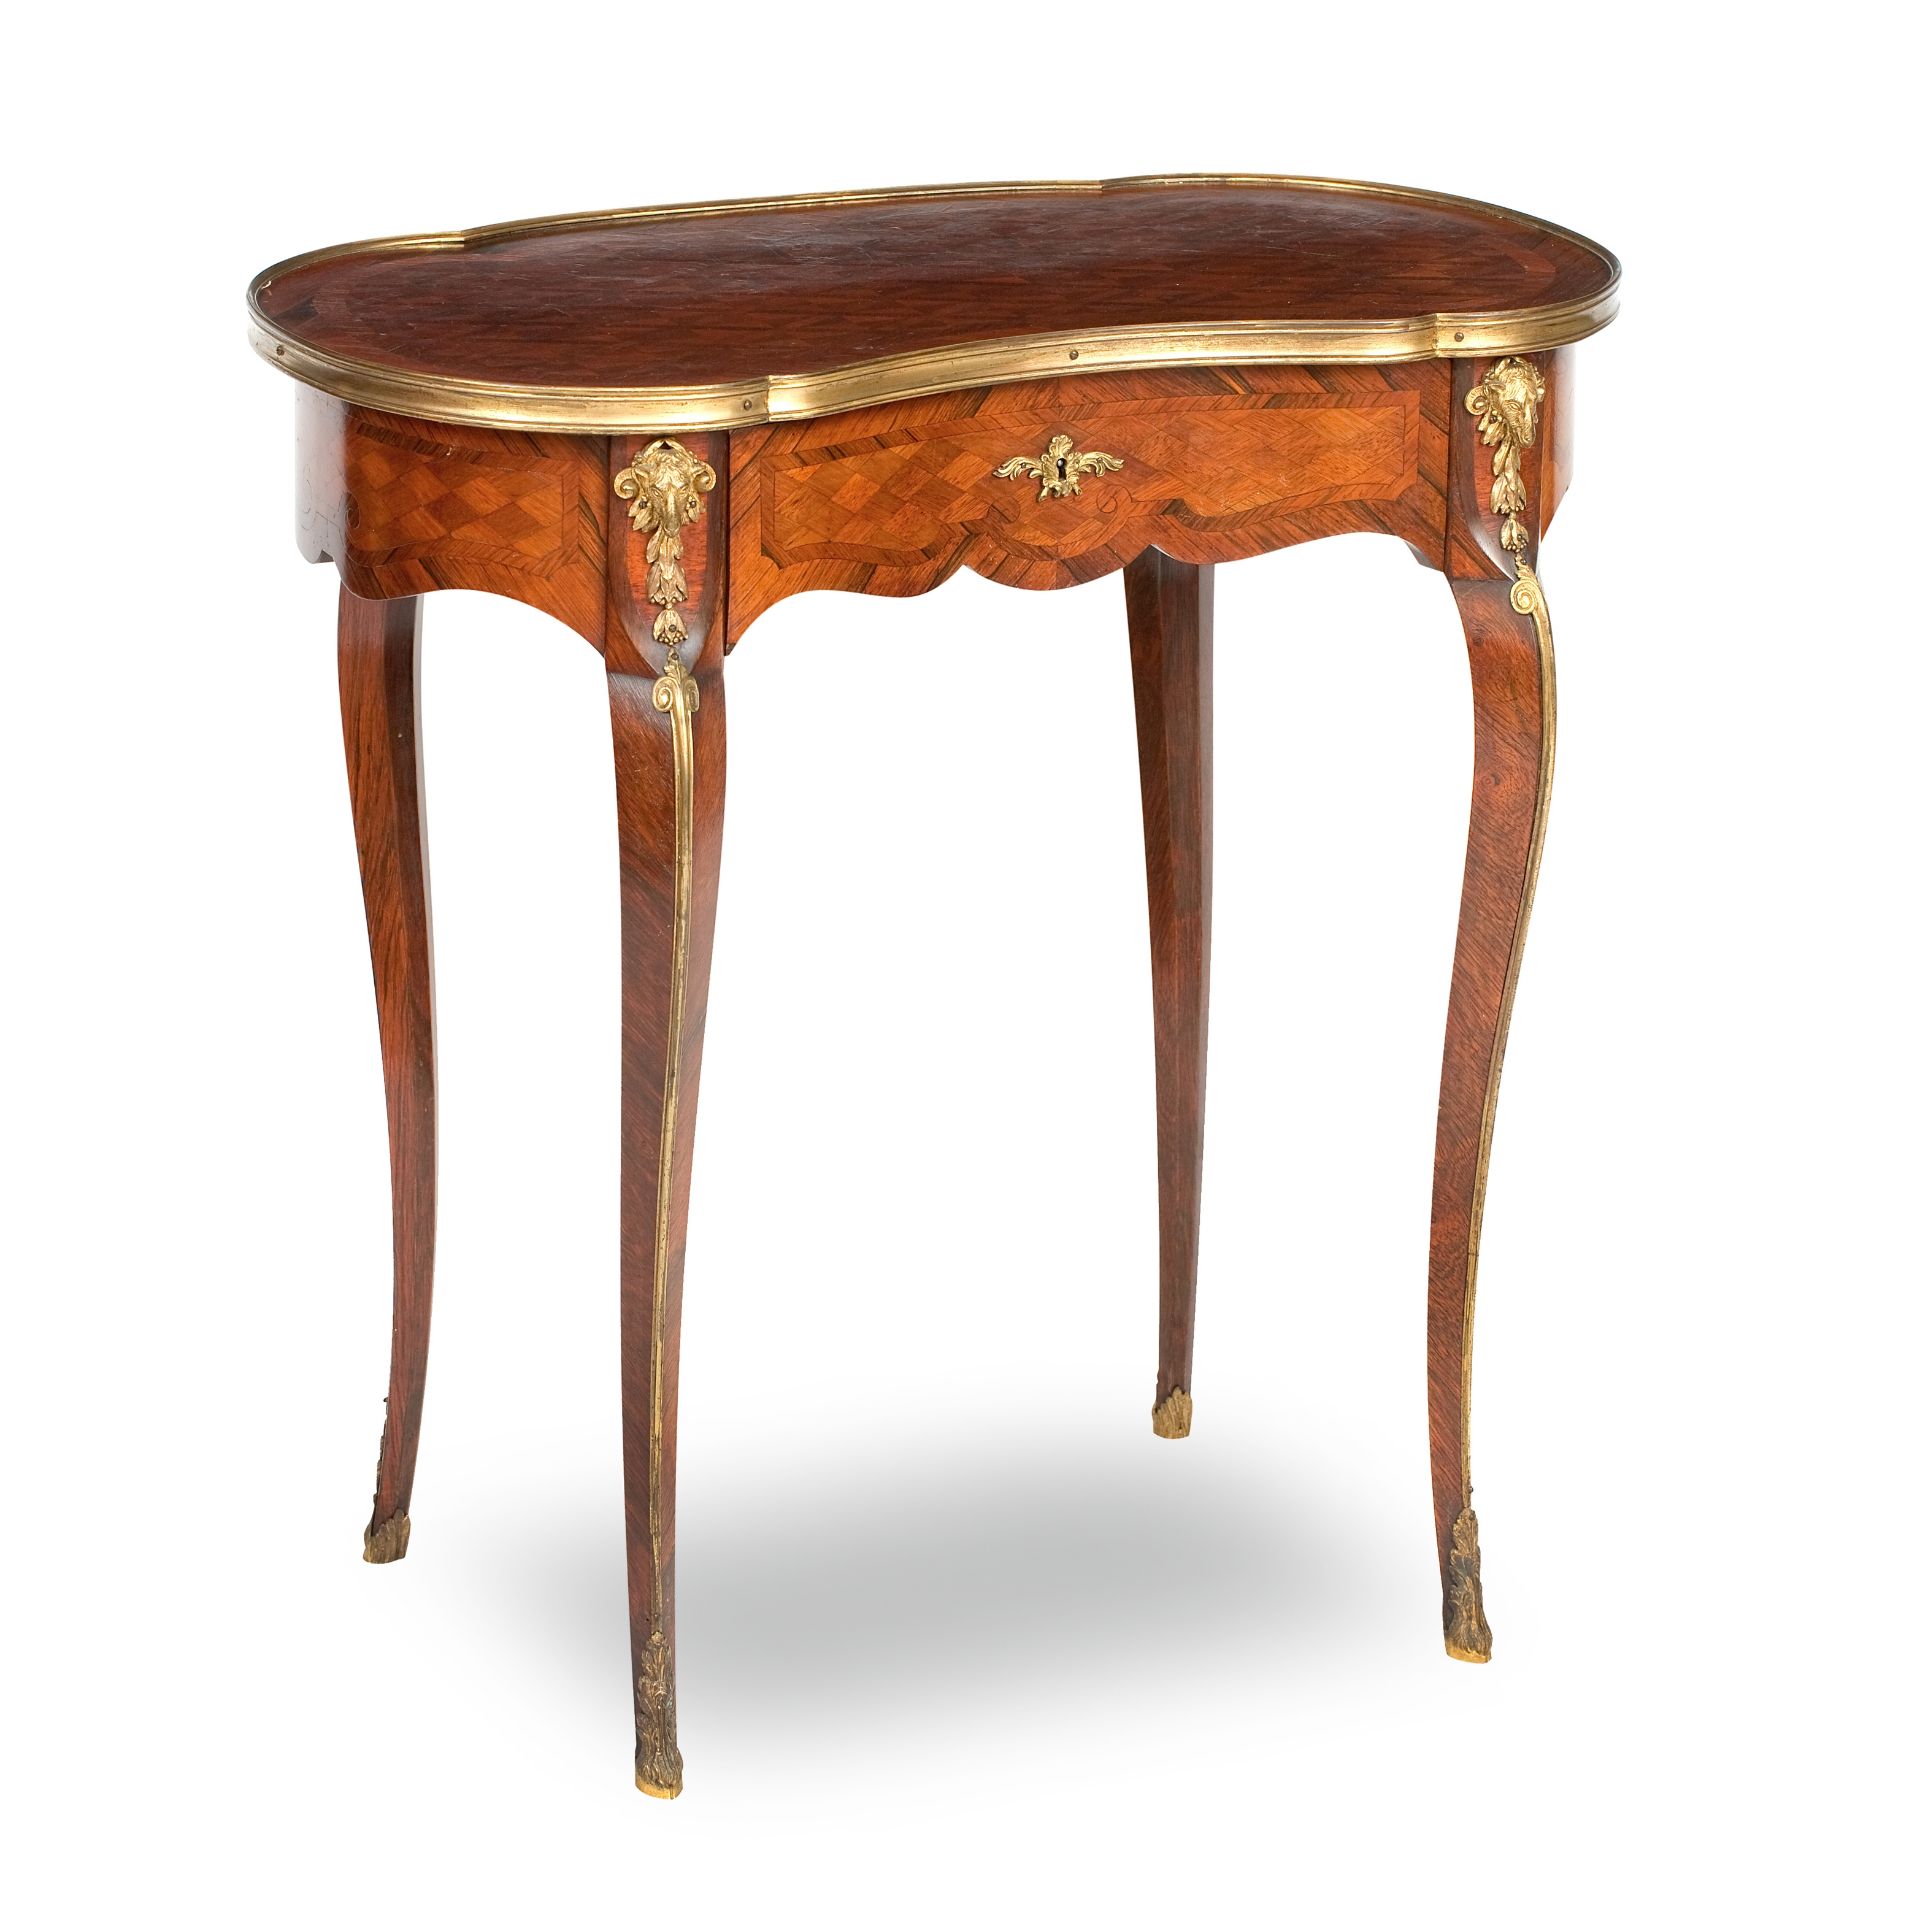 An early 20th century French rosewood parquetry and gilt metal mounted side table